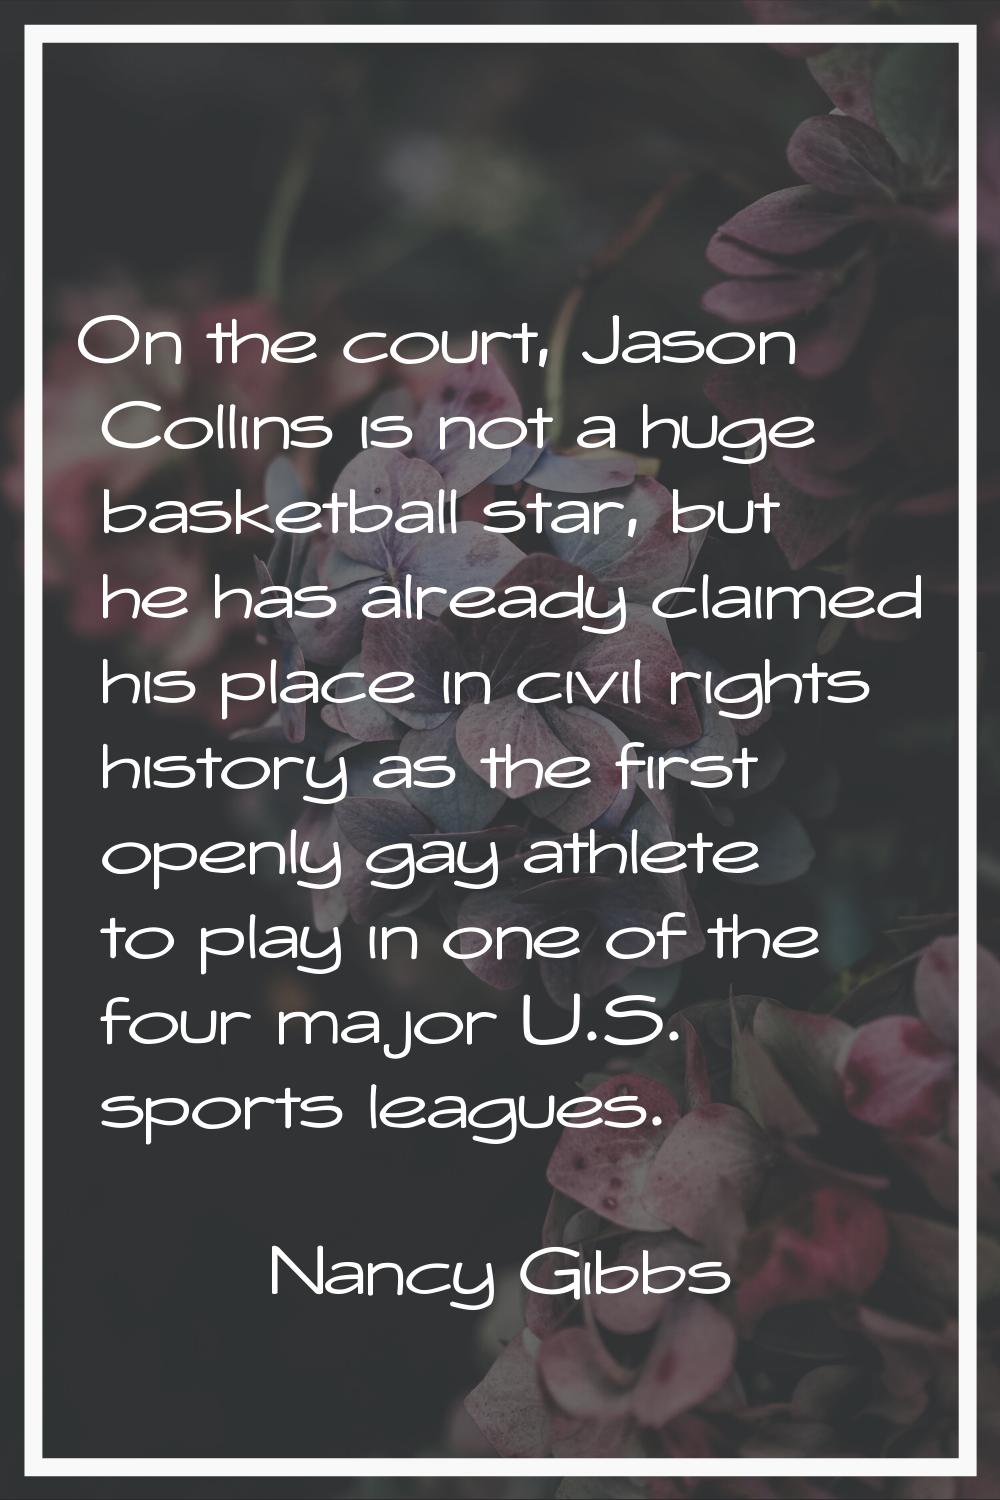 On the court, Jason Collins is not a huge basketball star, but he has already claimed his place in 